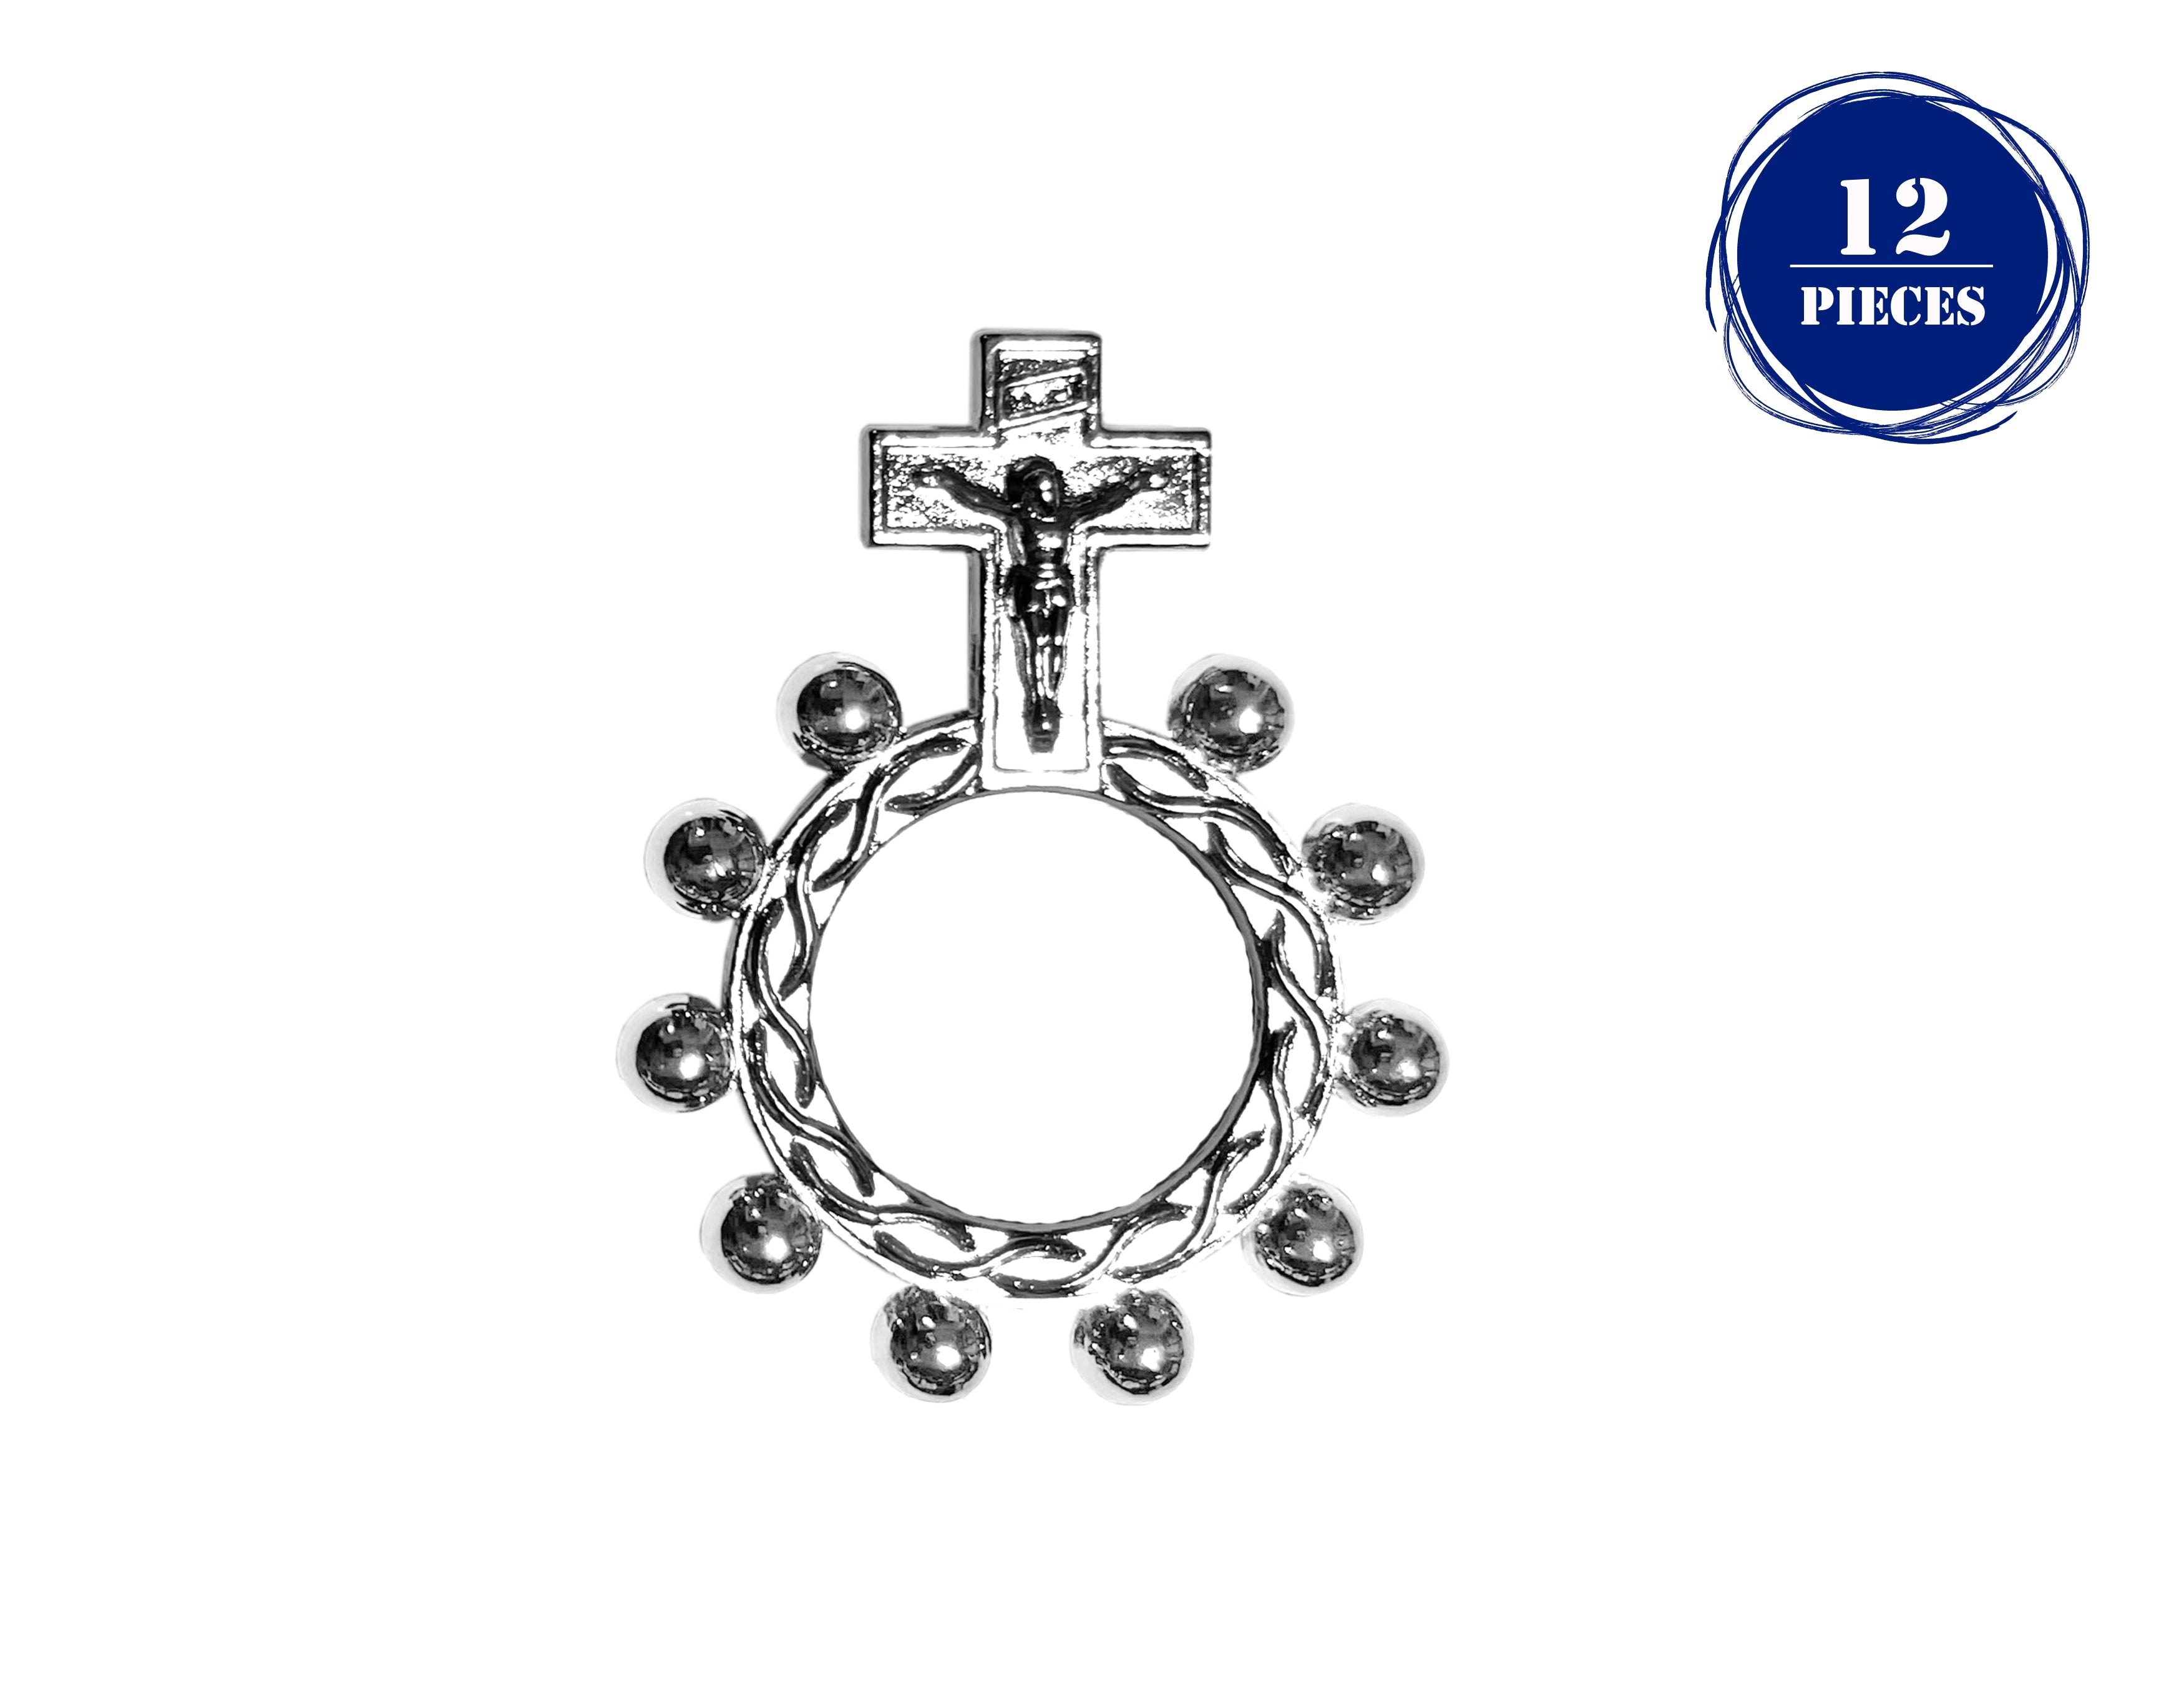 Nickel plated finger rosary